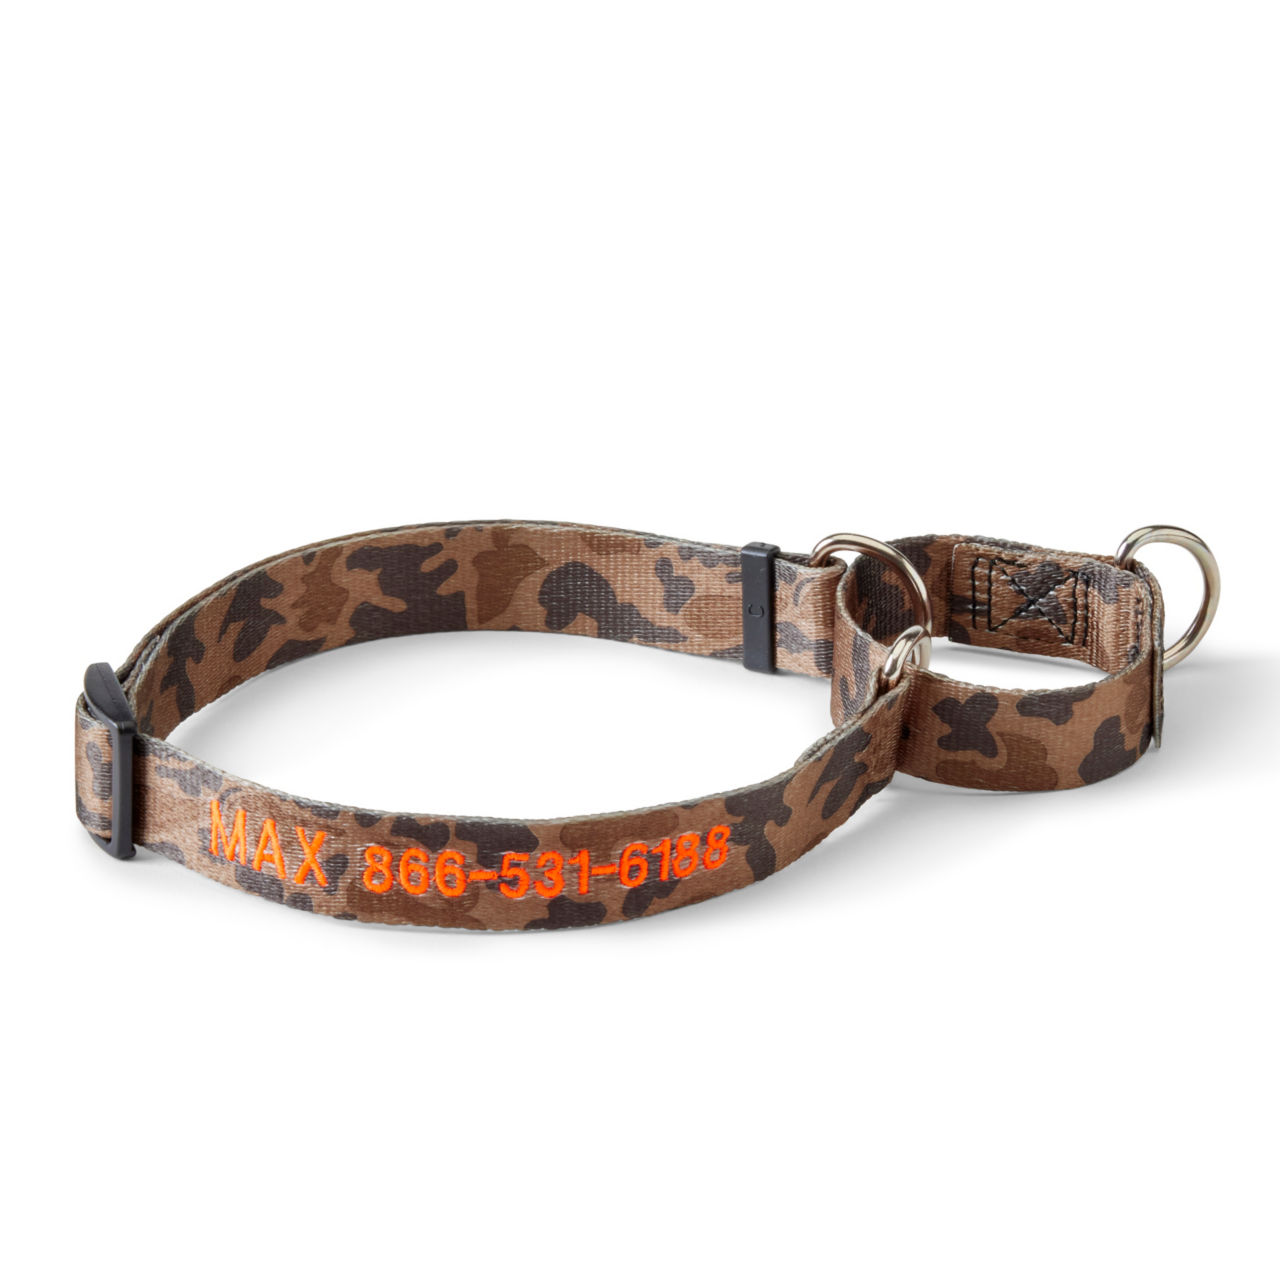 Personalized Martingale No-Pull Collar - ORVIS 1971 CAMO image number 0